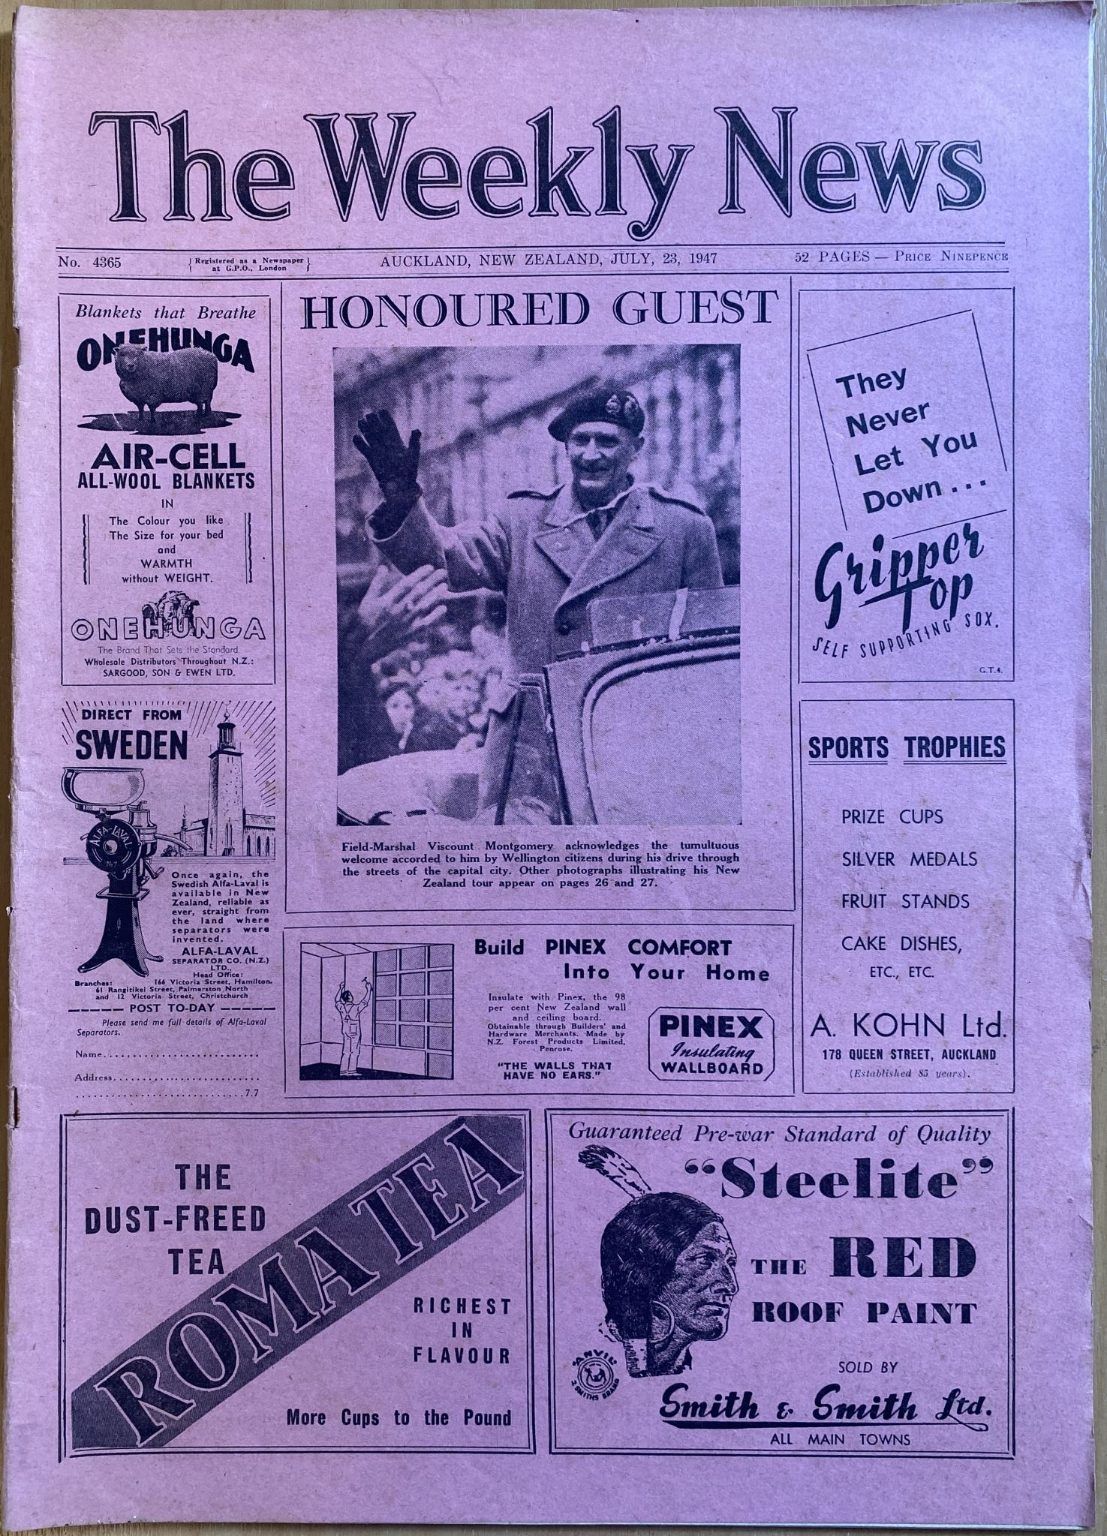 OLD NEWSPAPER: The Weekly News, No. 4365, 23 July 1947